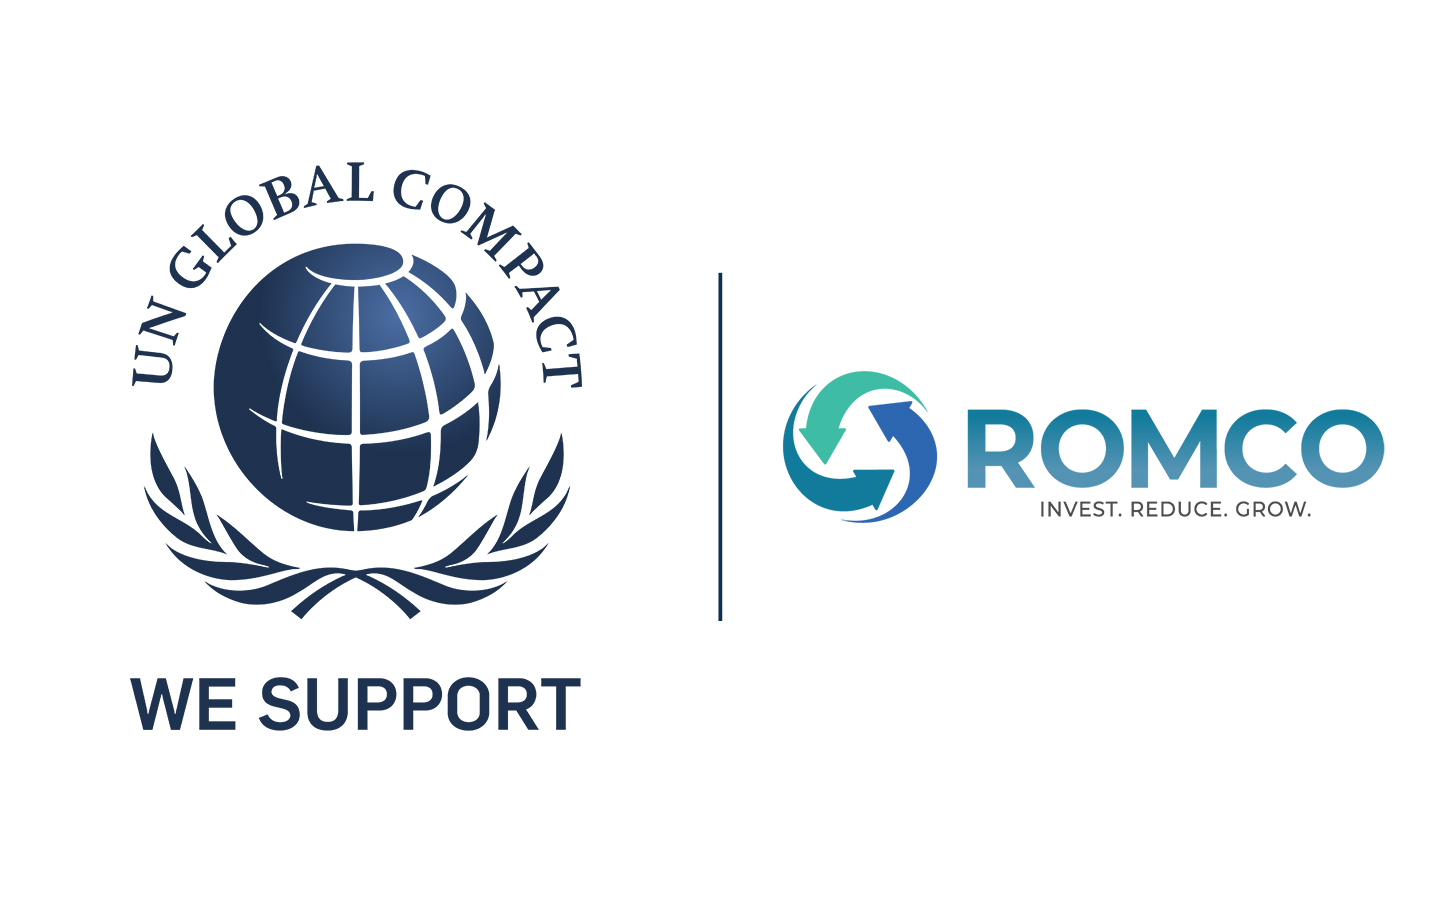 Company Announcement: Romco Have Signed The UN Global Compact